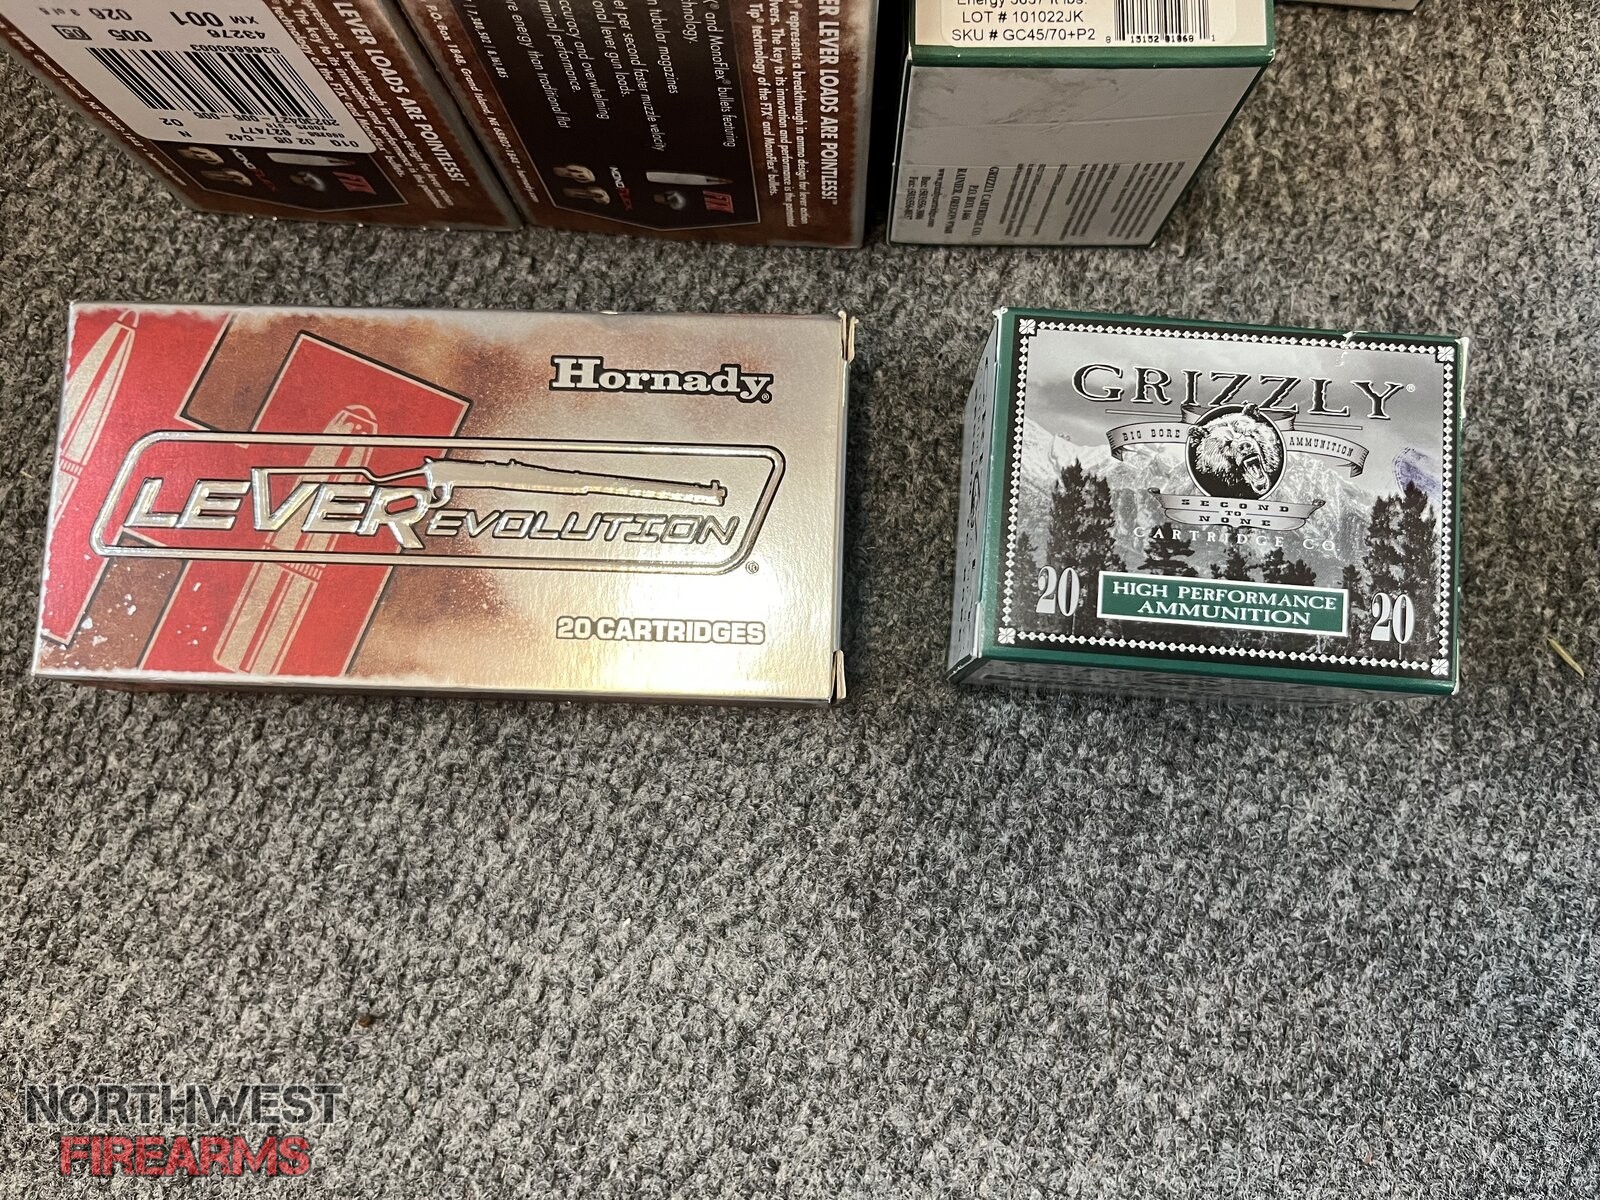 45-70 Ammo Hornady and Grizzly | Northwest Firearms